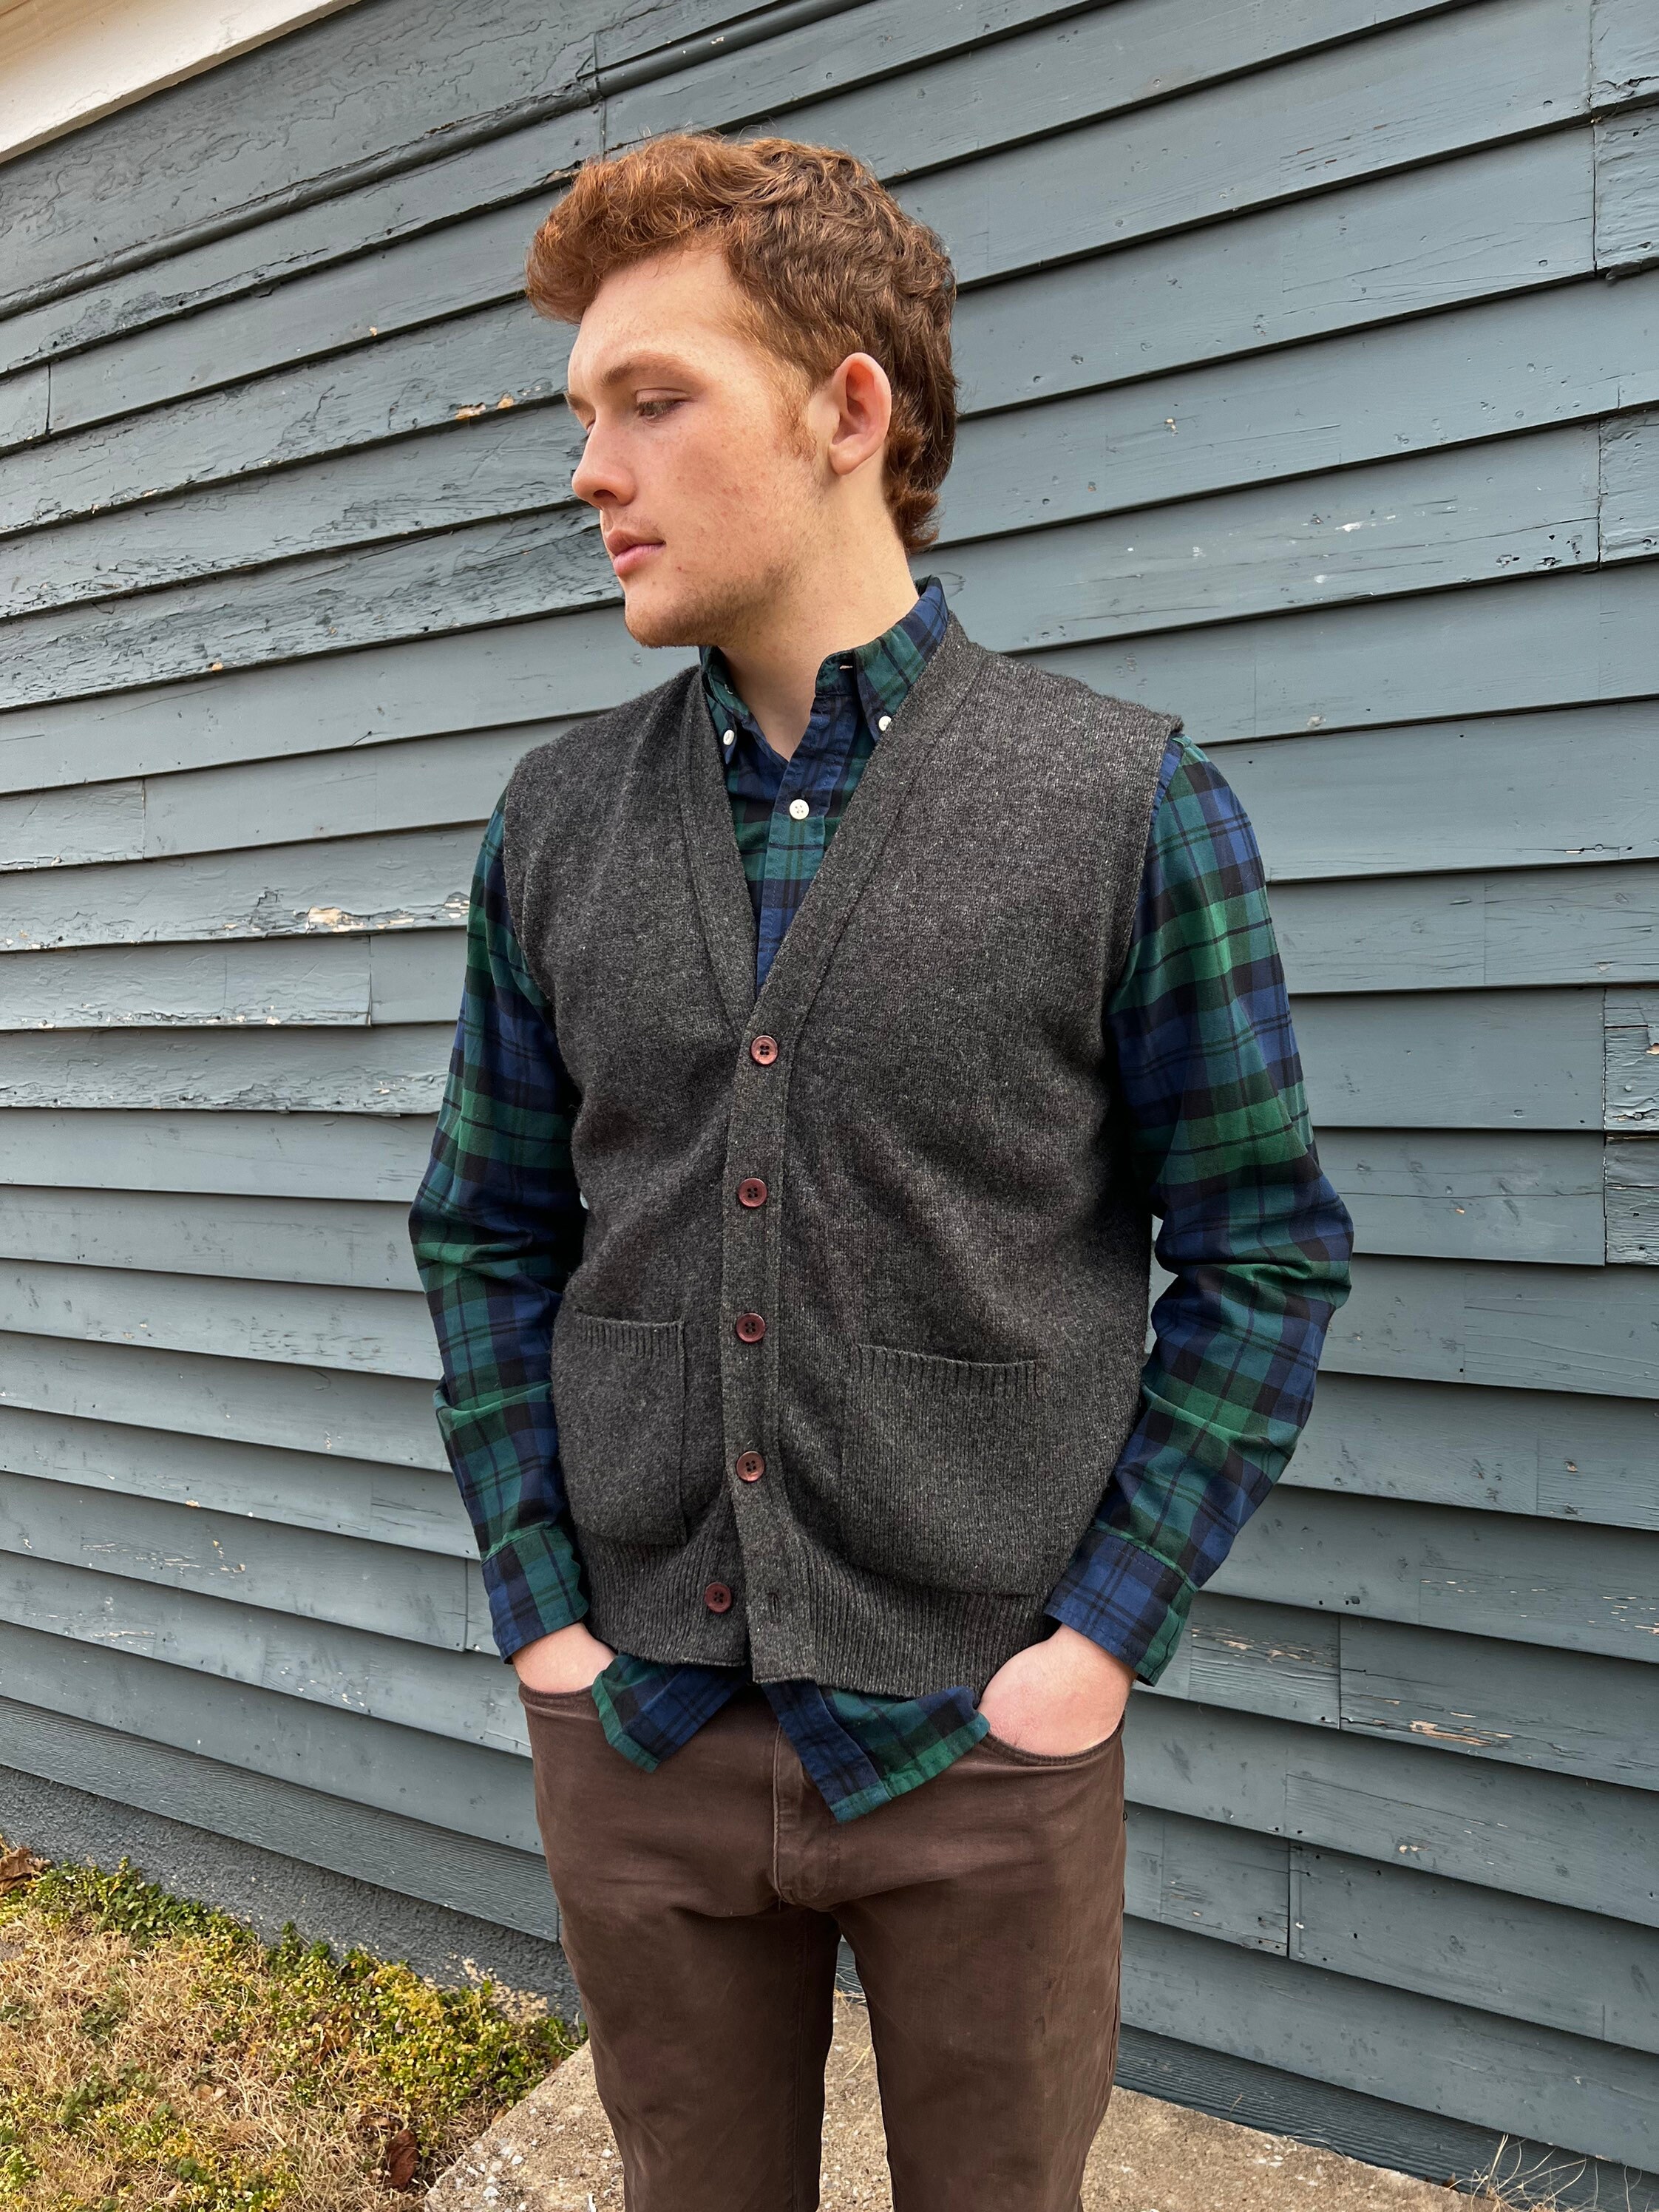 Vintage Lambswool Sweater Vest//button Front Mens Sweater   Etsy